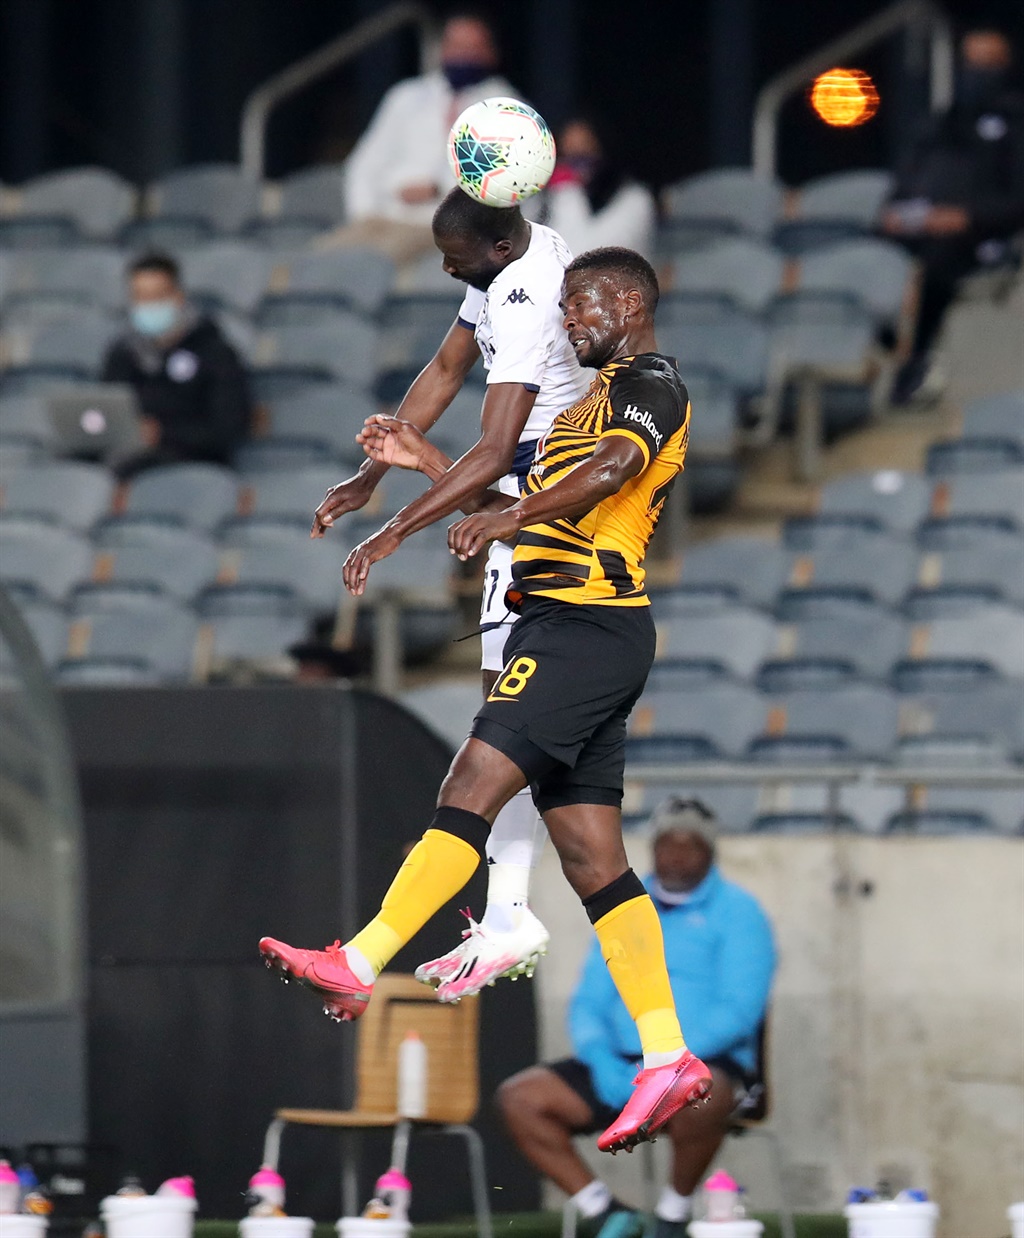 Kgotso Moleko of Kaizer Chiefs challenged by Deon Hotto of Bidvest Wits during their Absa Premiership match on August 12 2020. Picture: Muzi Ntombela/Gallo Images/BackpagePix